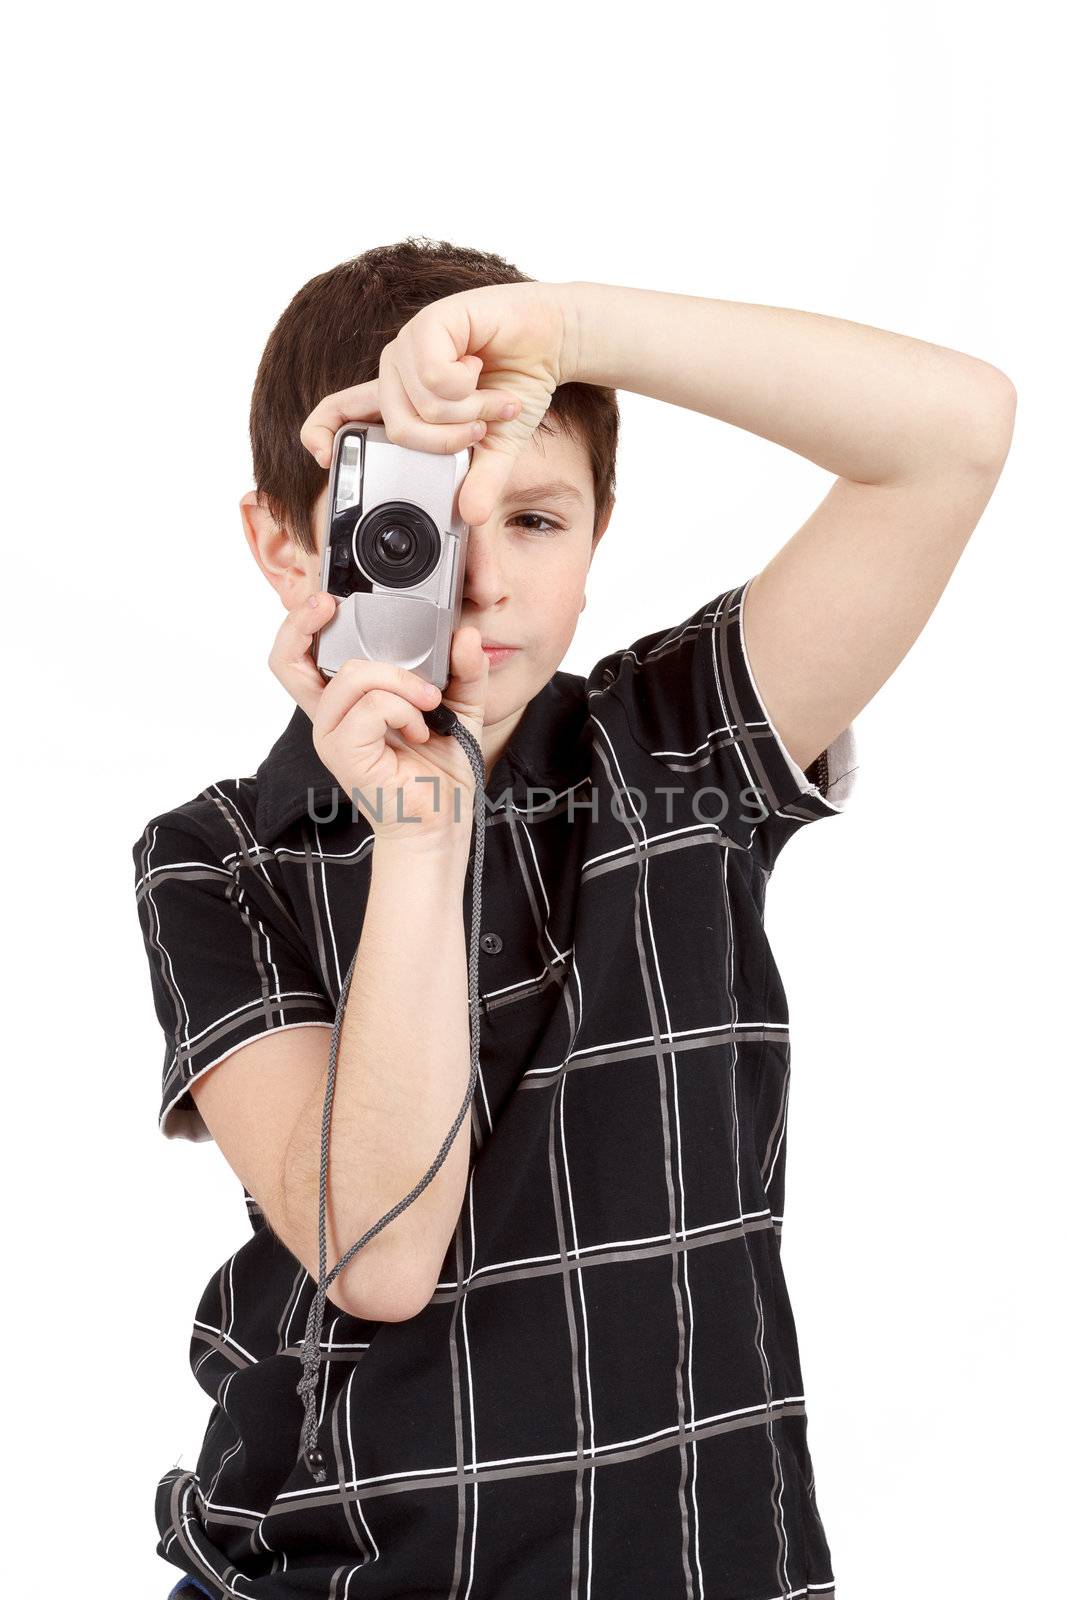 small boy photographing vertical with digital camera on white background